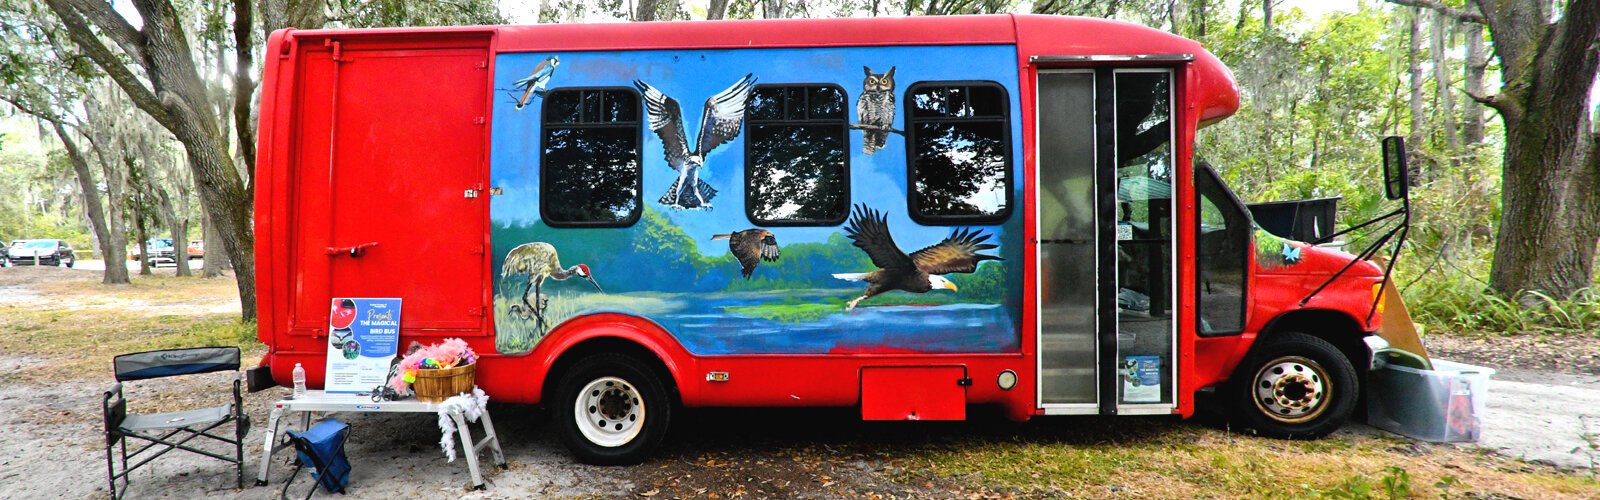 The Magical Bird Bus is a mobile educational tool used by the non-profit Raptor Center of Tampa Bay to increase public awareness of wildlife and conservation issues.